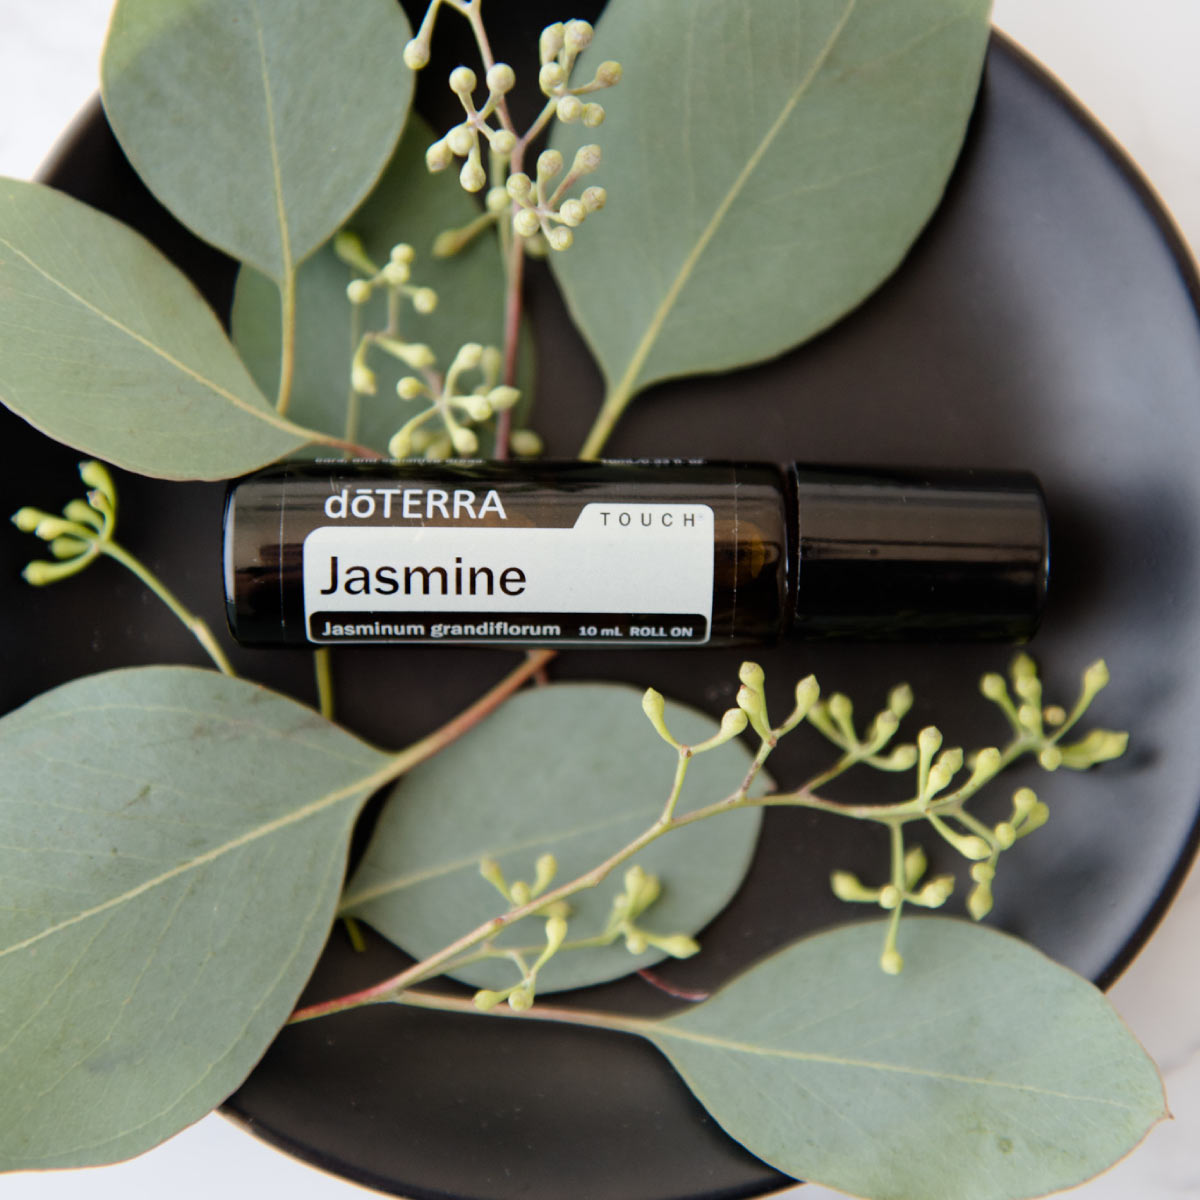 Jasmine essential oil bottle surrounded by green leaves. How do I use Jasmine essential oil? Jasmine oil can be used to reduce the appearance of skin imperfections and promote relaxation.